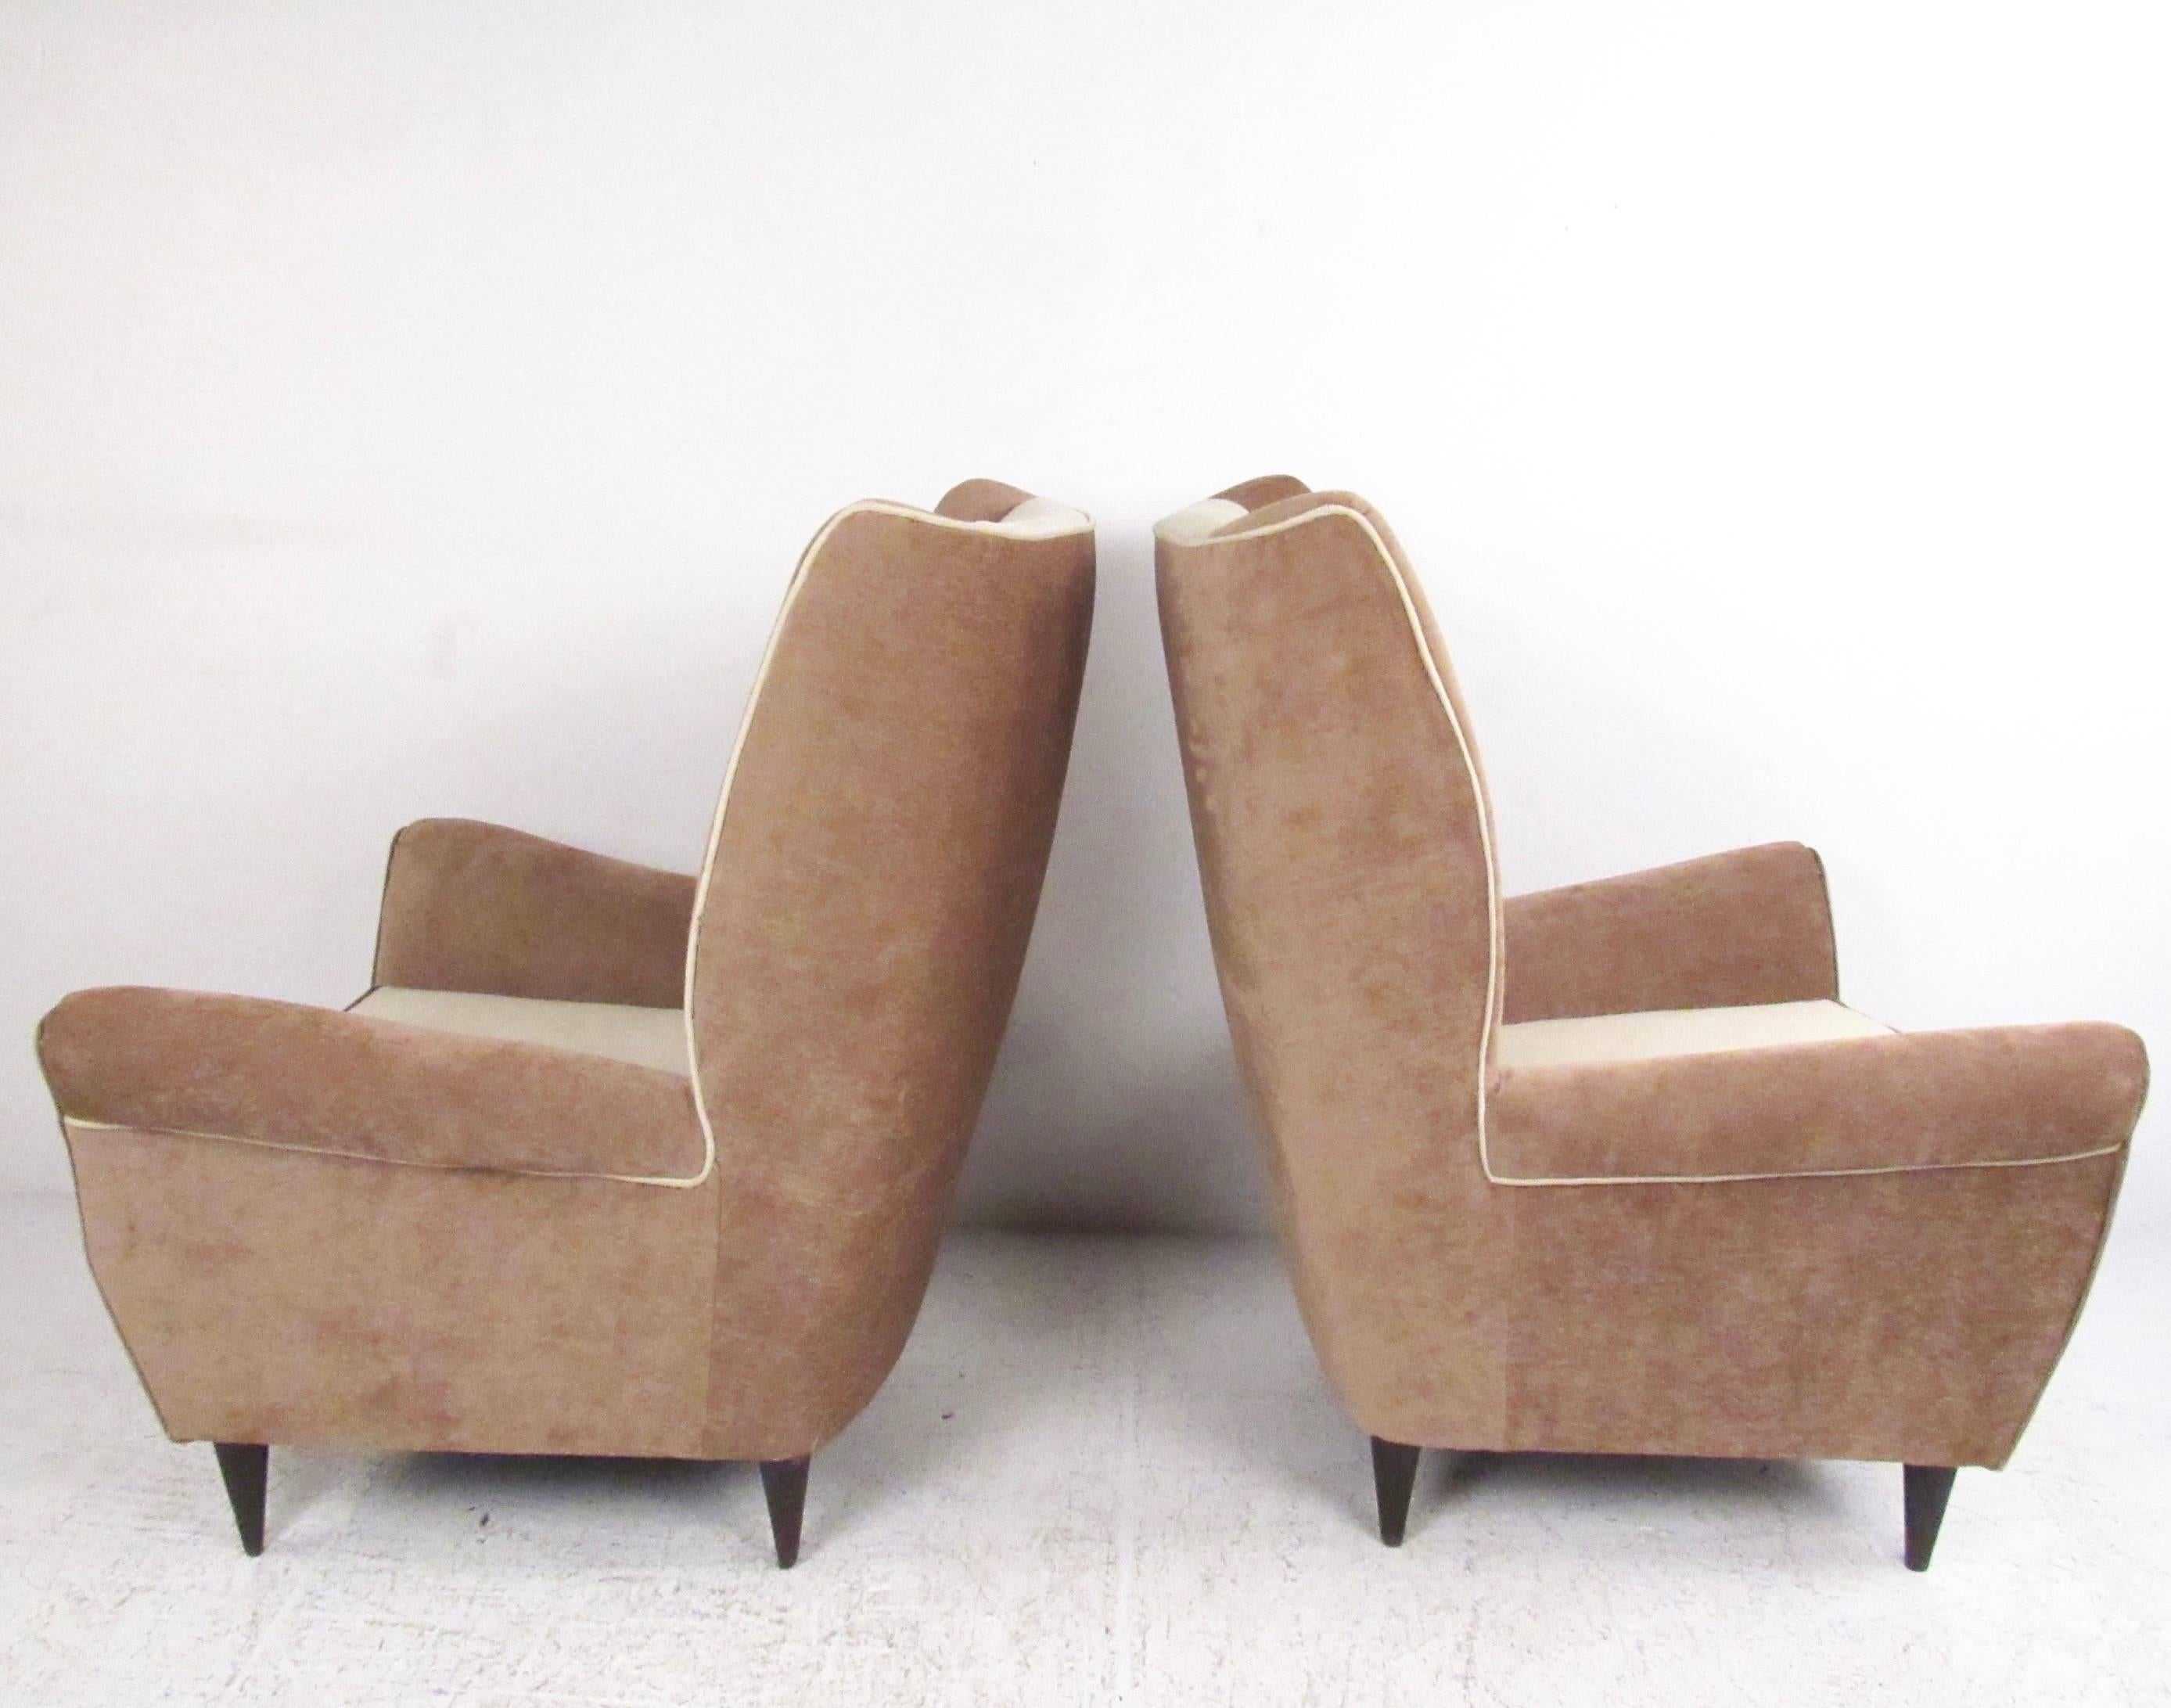 20th Century Pair of Modern Italian High Back Lounge Chairs For Sale